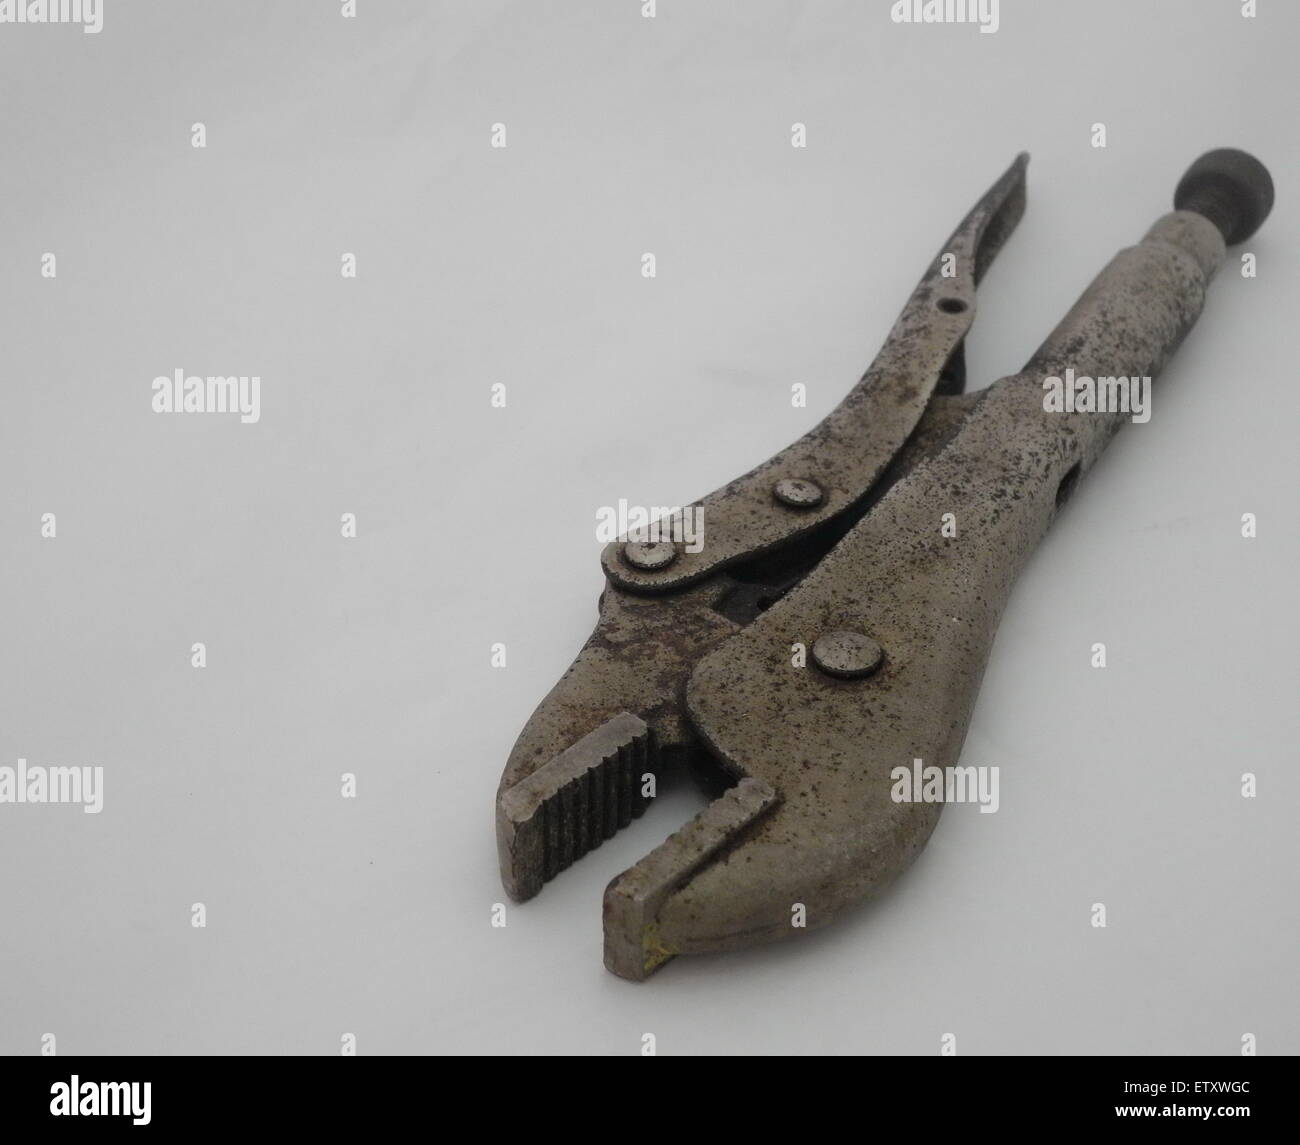 One tool is called locking pliers Stock Photo